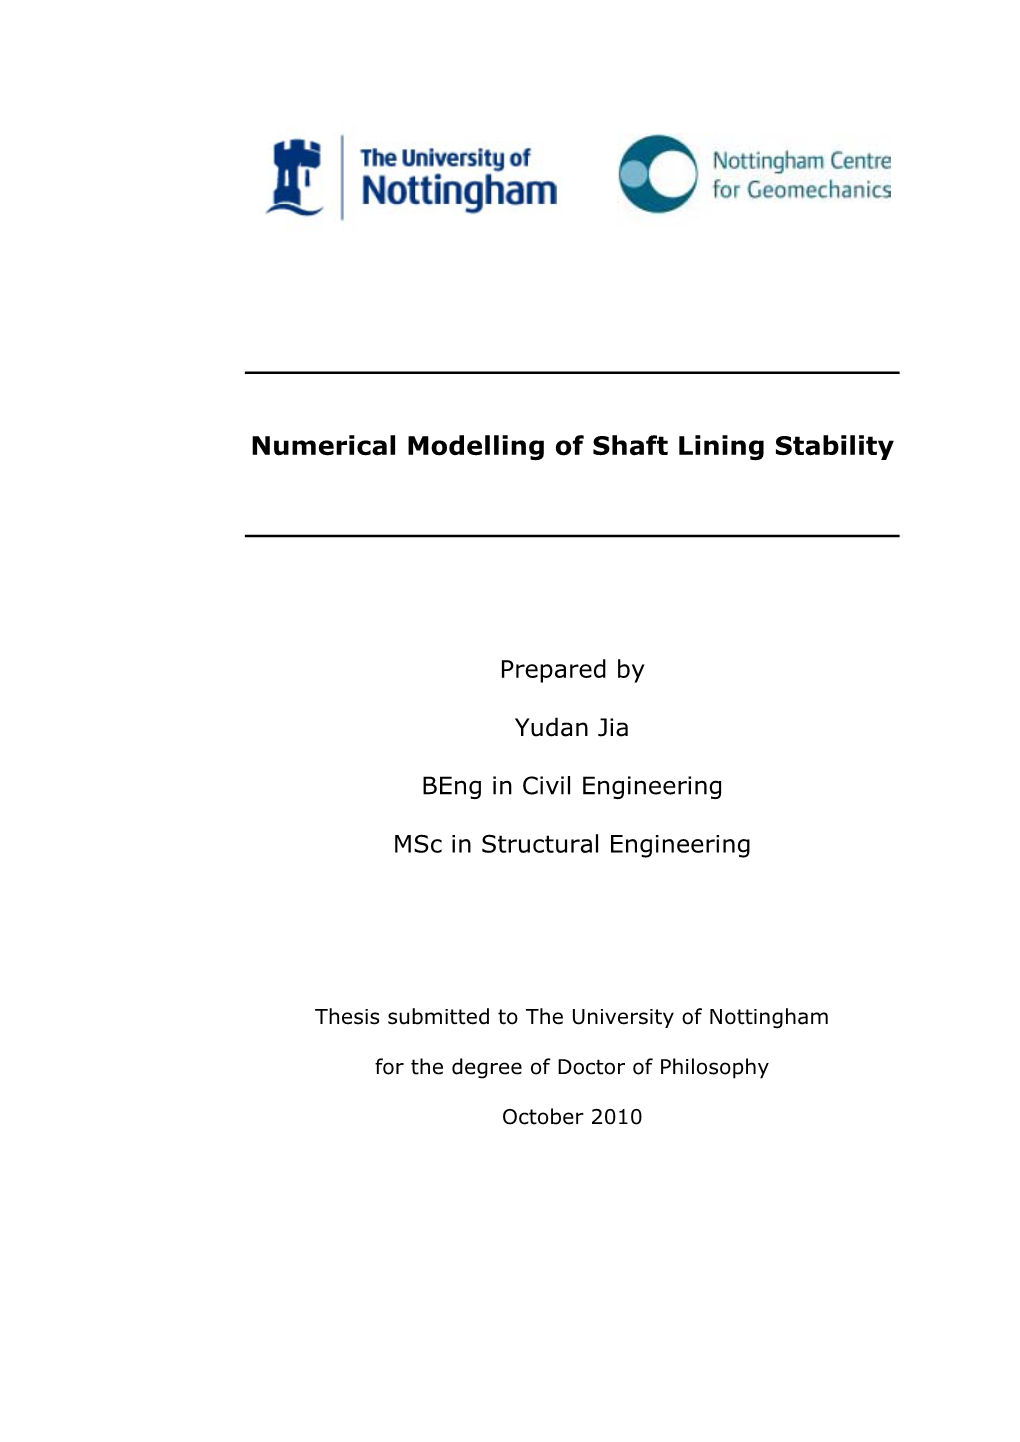 Numerical Modelling of Shaft Lining Stability